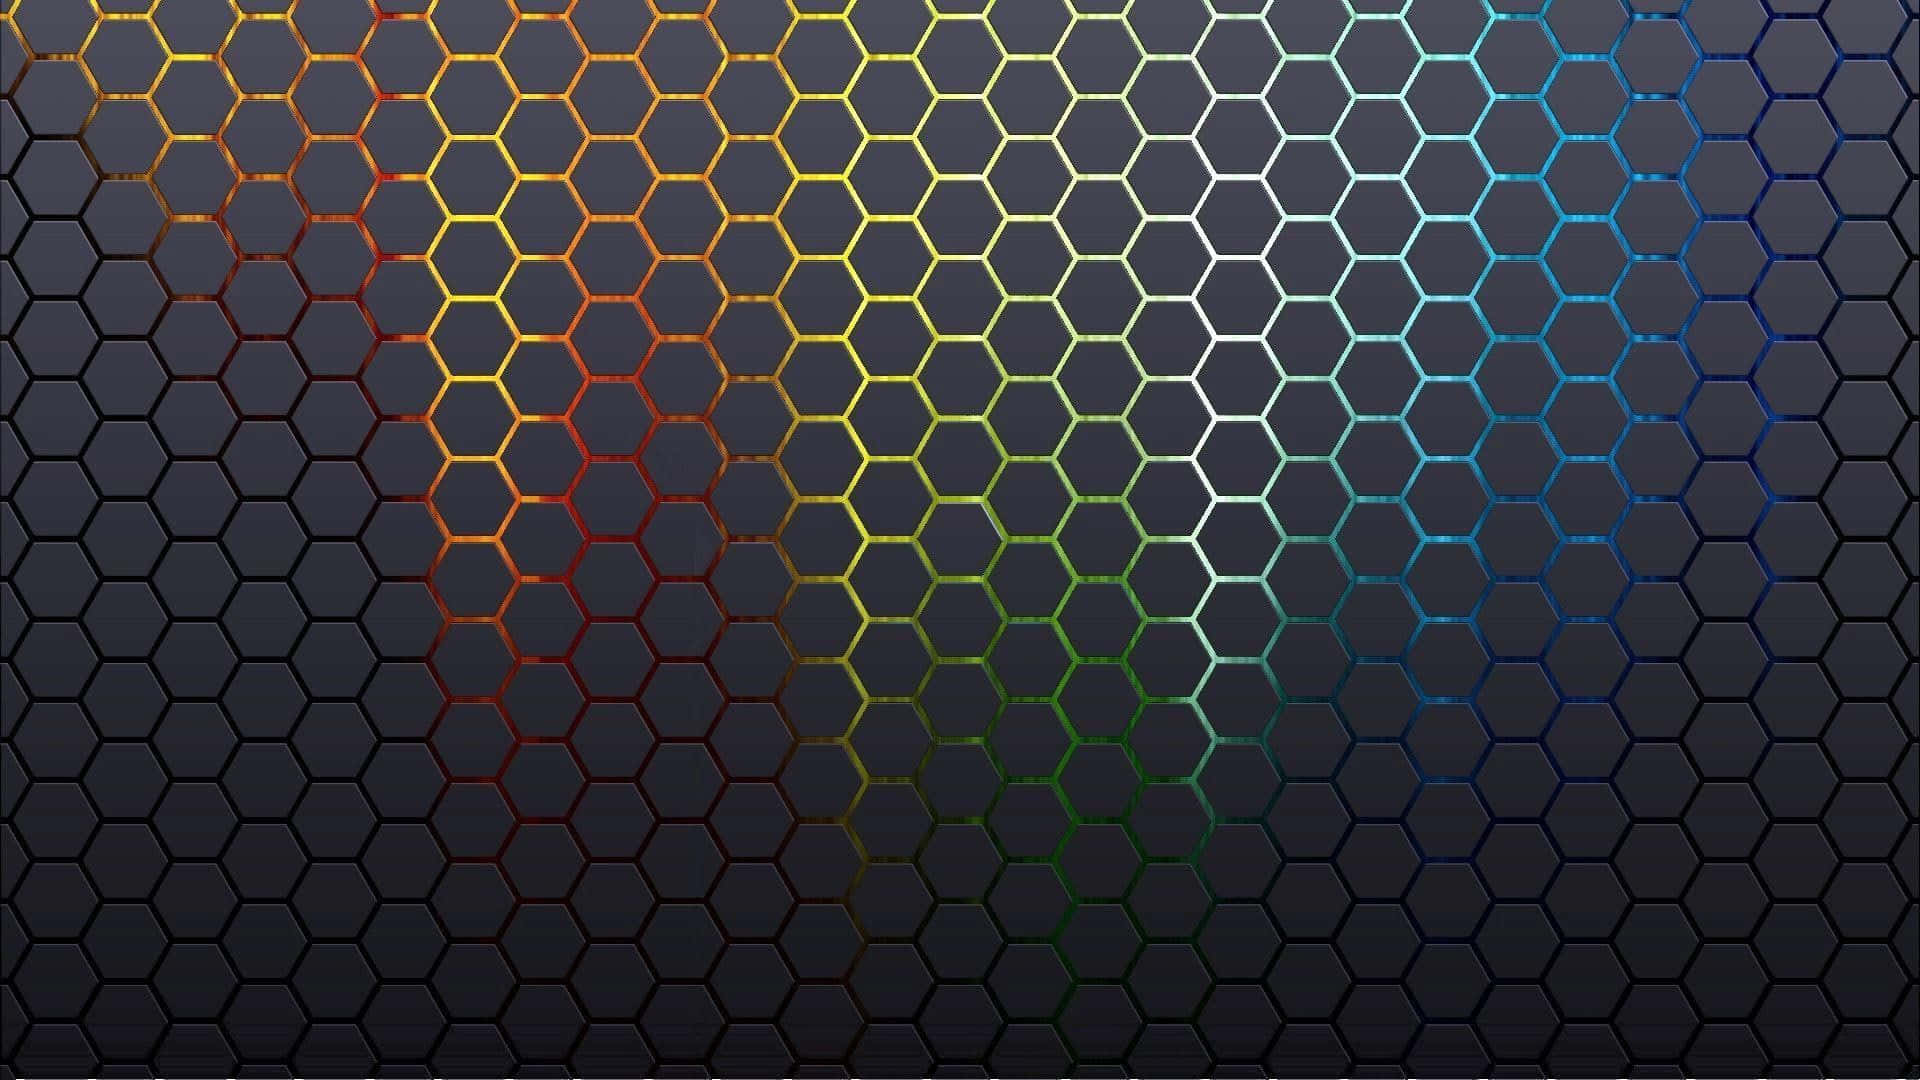 A Fragmented Pattern of Hexagons